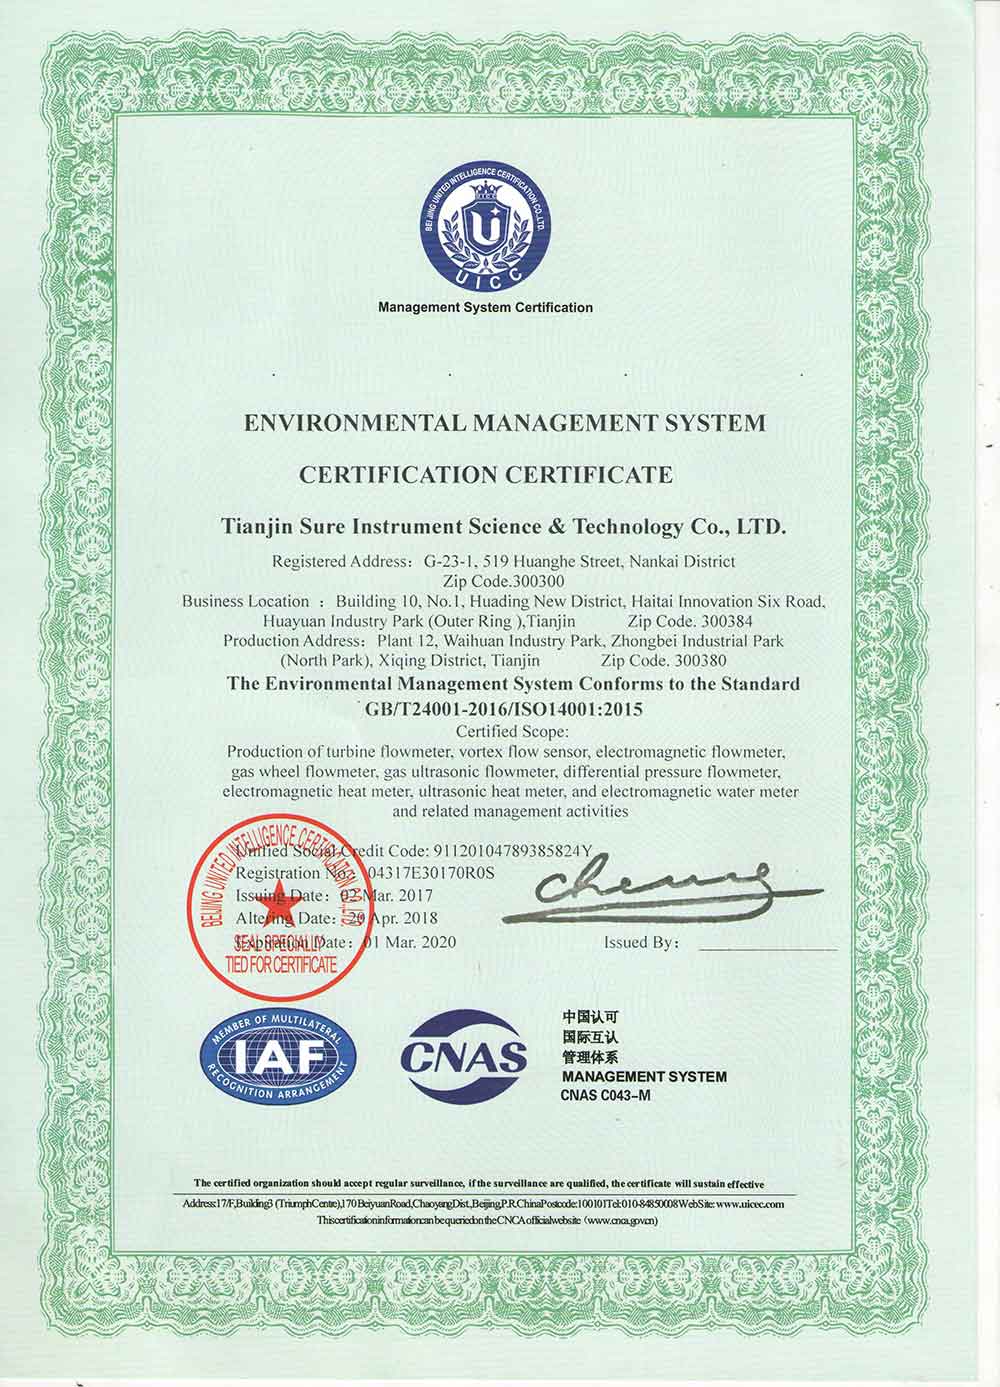  Environmental management system certification certifacate  ISO14001